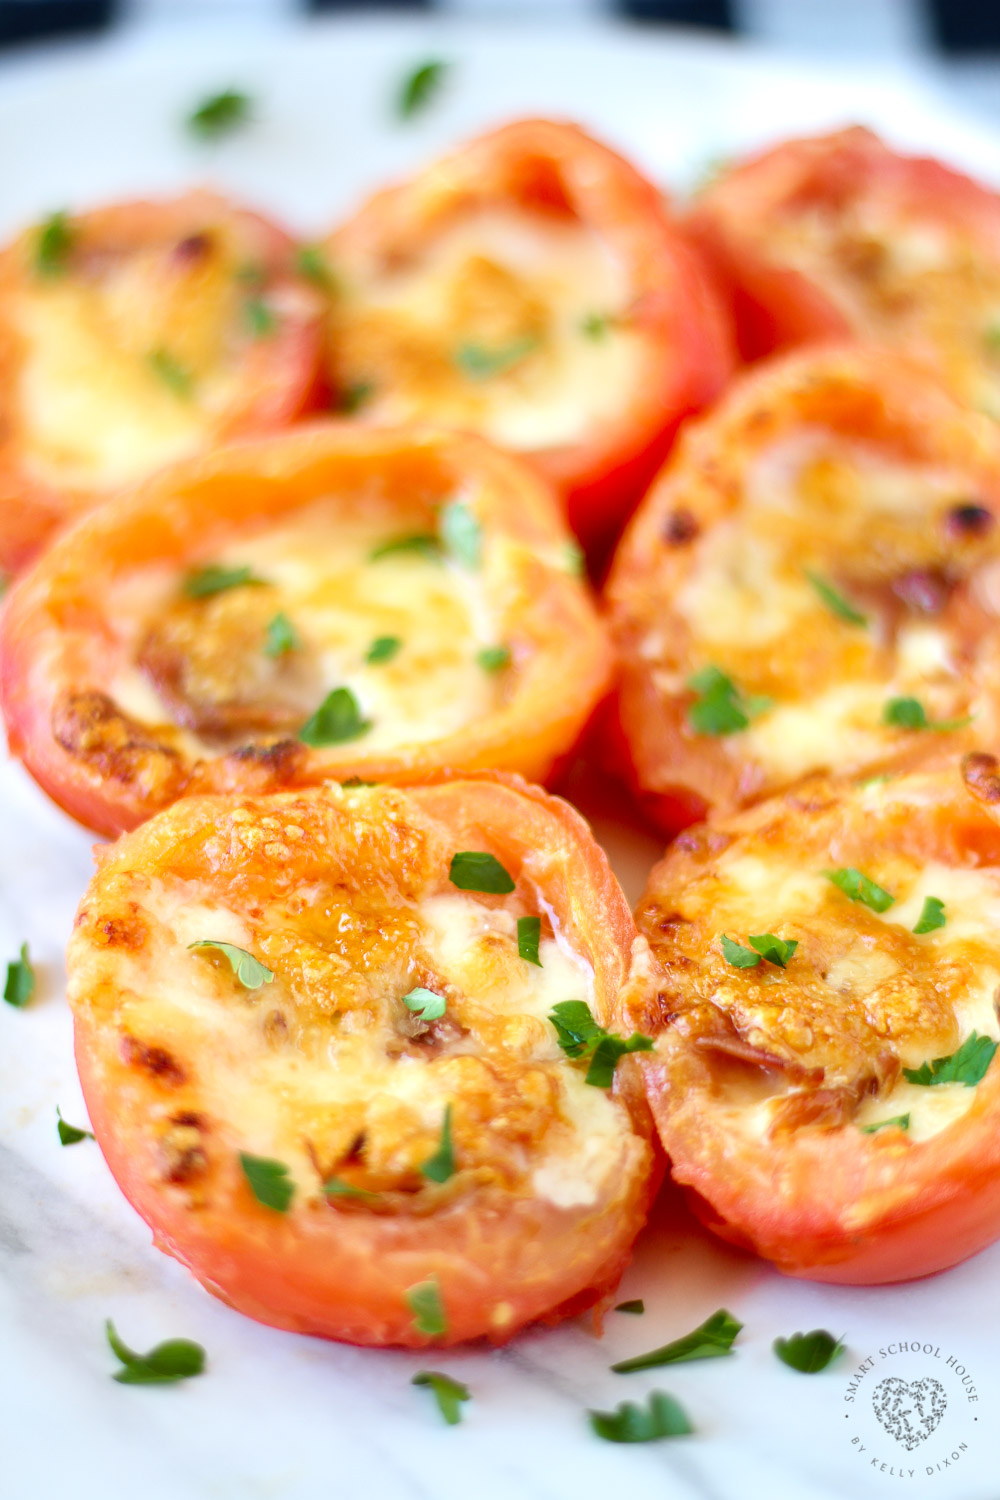 Cheesy Stuffed Baked Tomatoes with Prosciutto